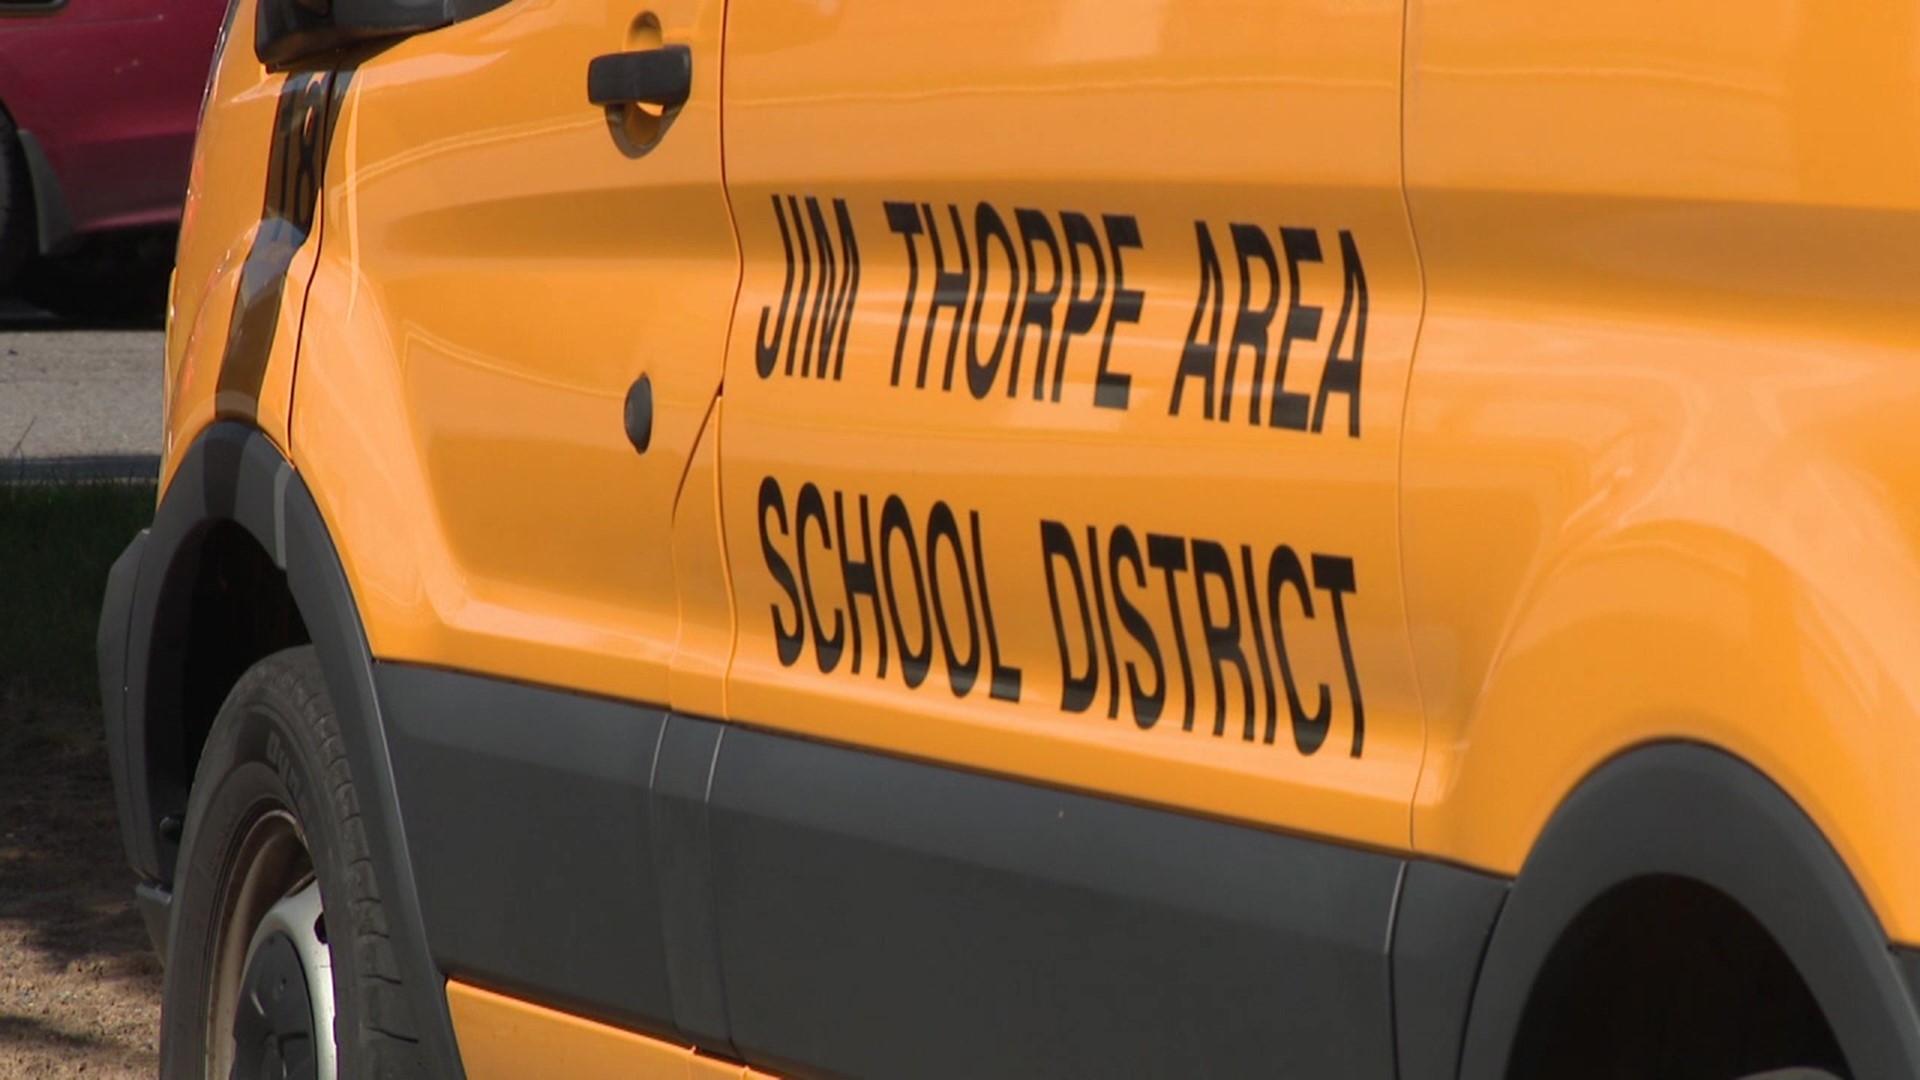 The Jim Thorpe Area School District superintendent believes things will get better soon because more people have applied to be drivers.